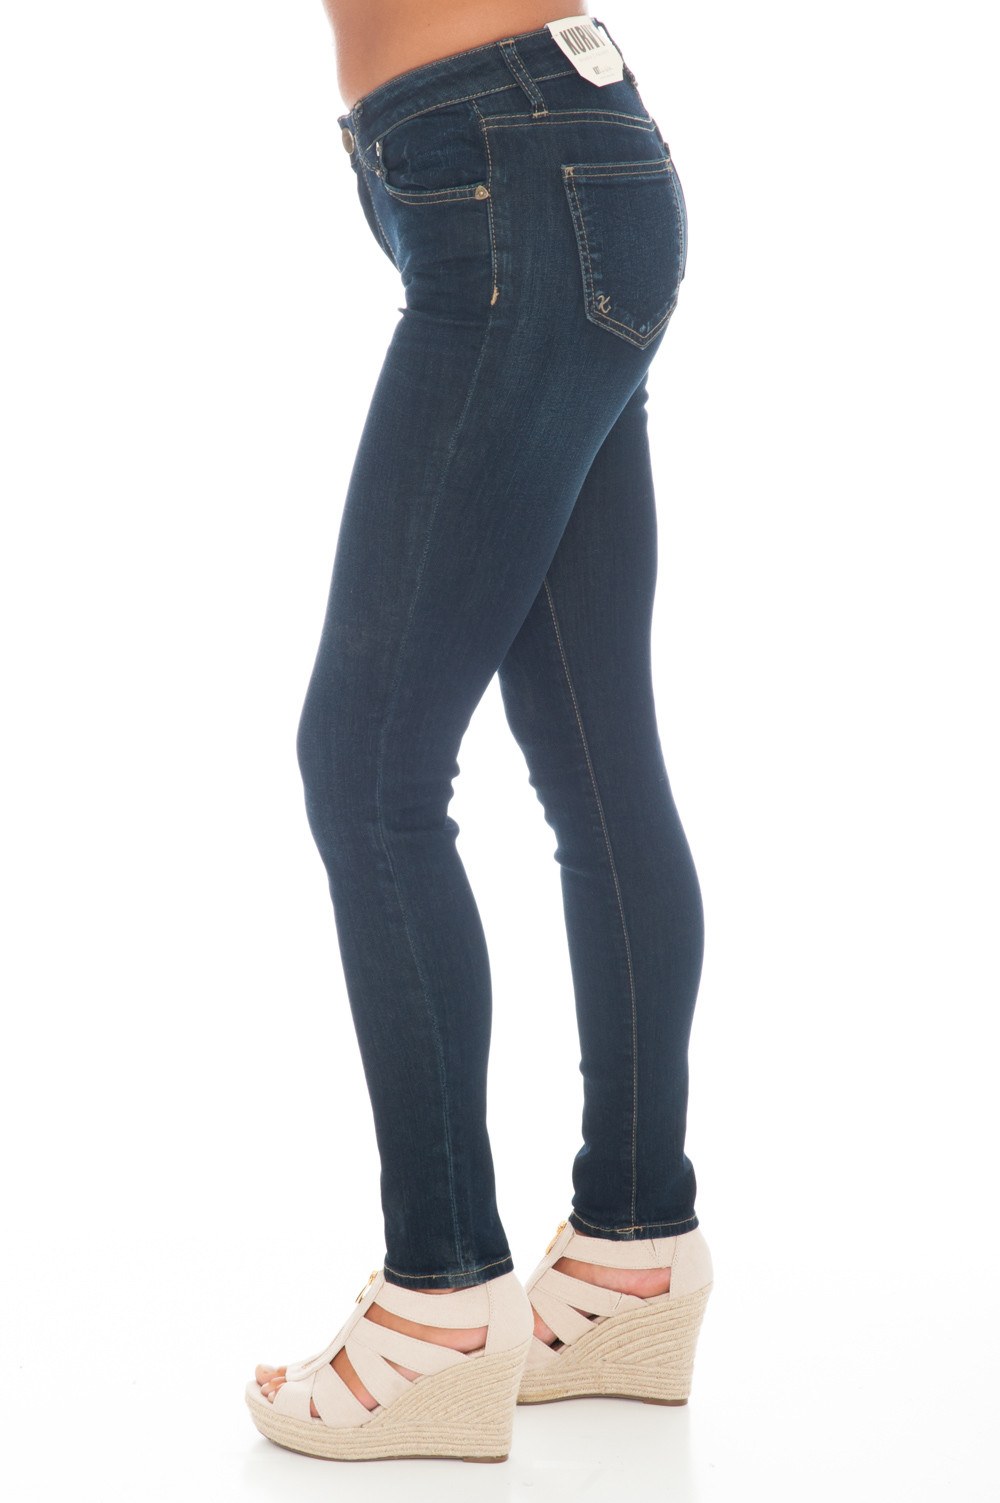 Jean - Diana Limitless Kurvy Skinny by Kut From the Kloth - 2